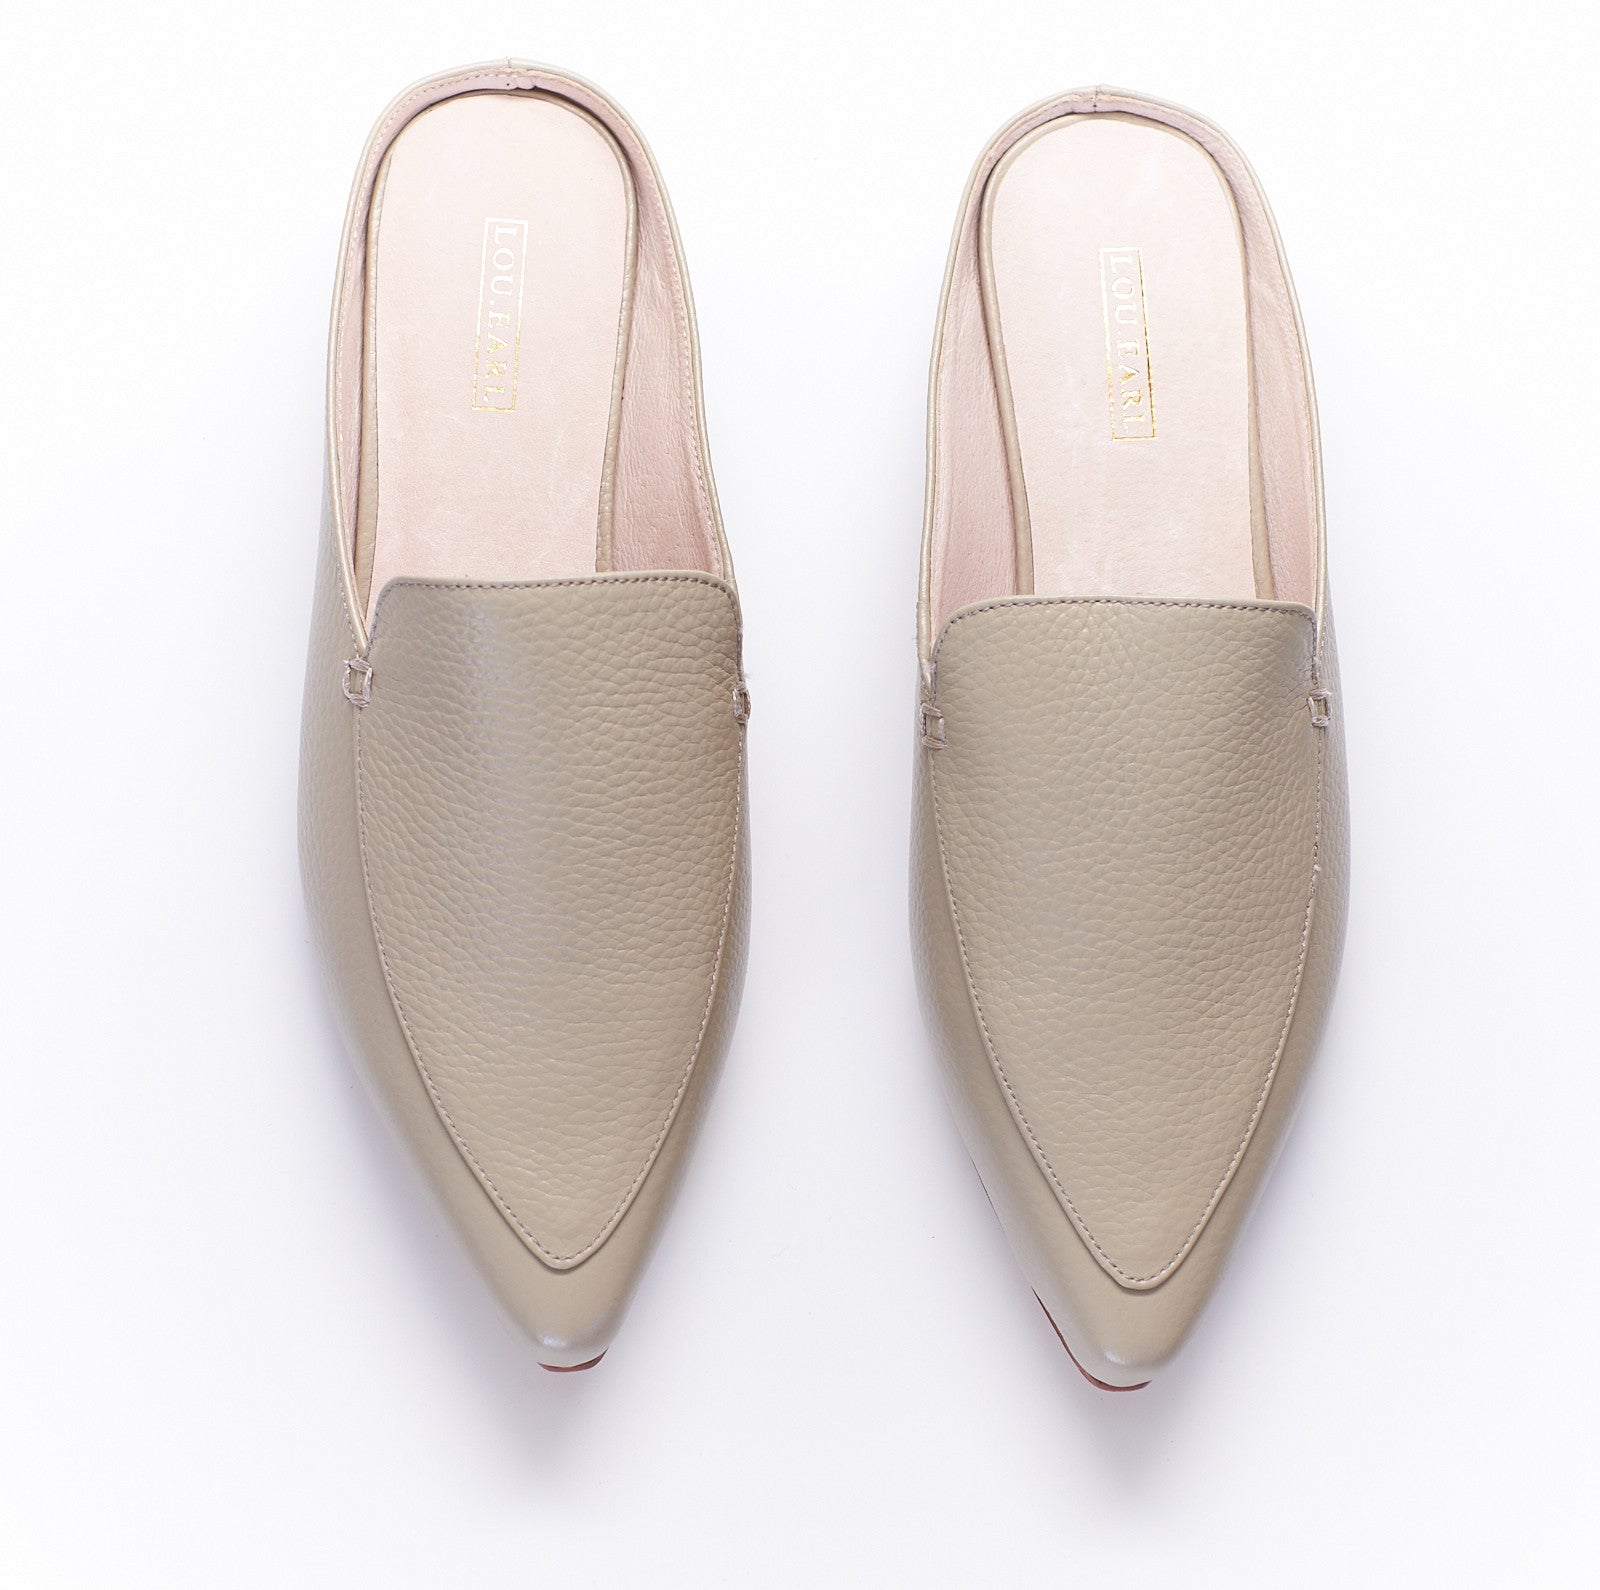 pointed toe slip on tumbled leather flat mule shoes for women. sale last pairs. size 6. 